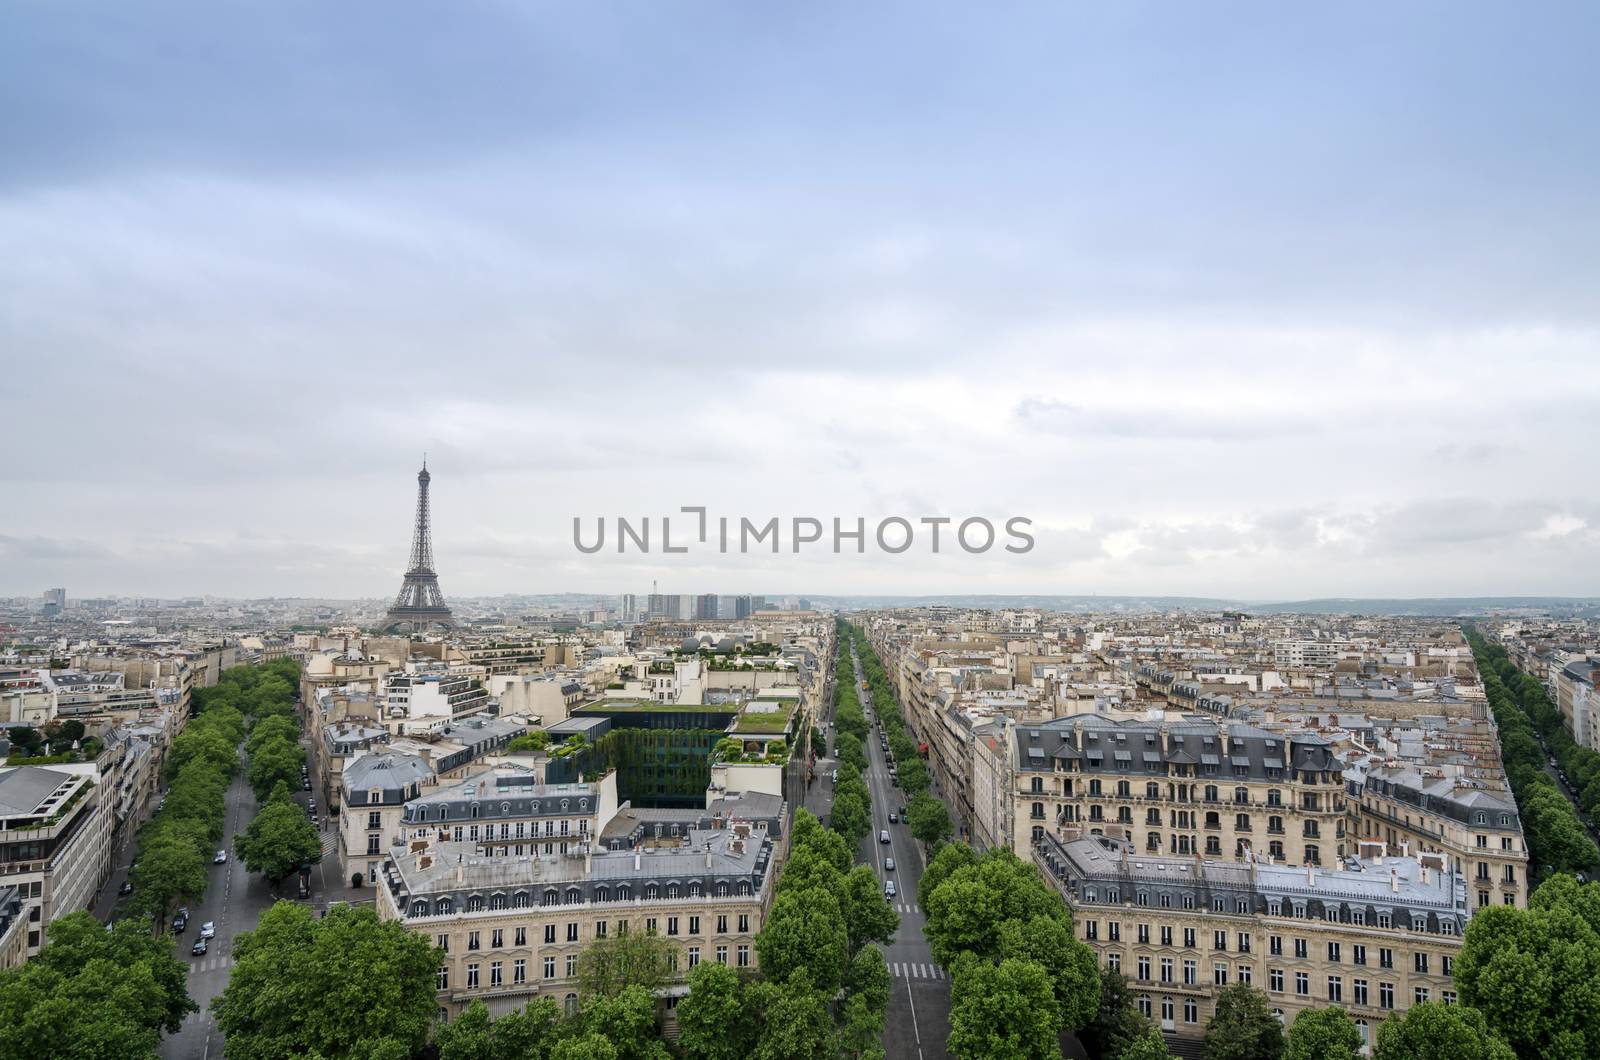 Paris skyline view from the Arc de Triomphe in Paris by siraanamwong